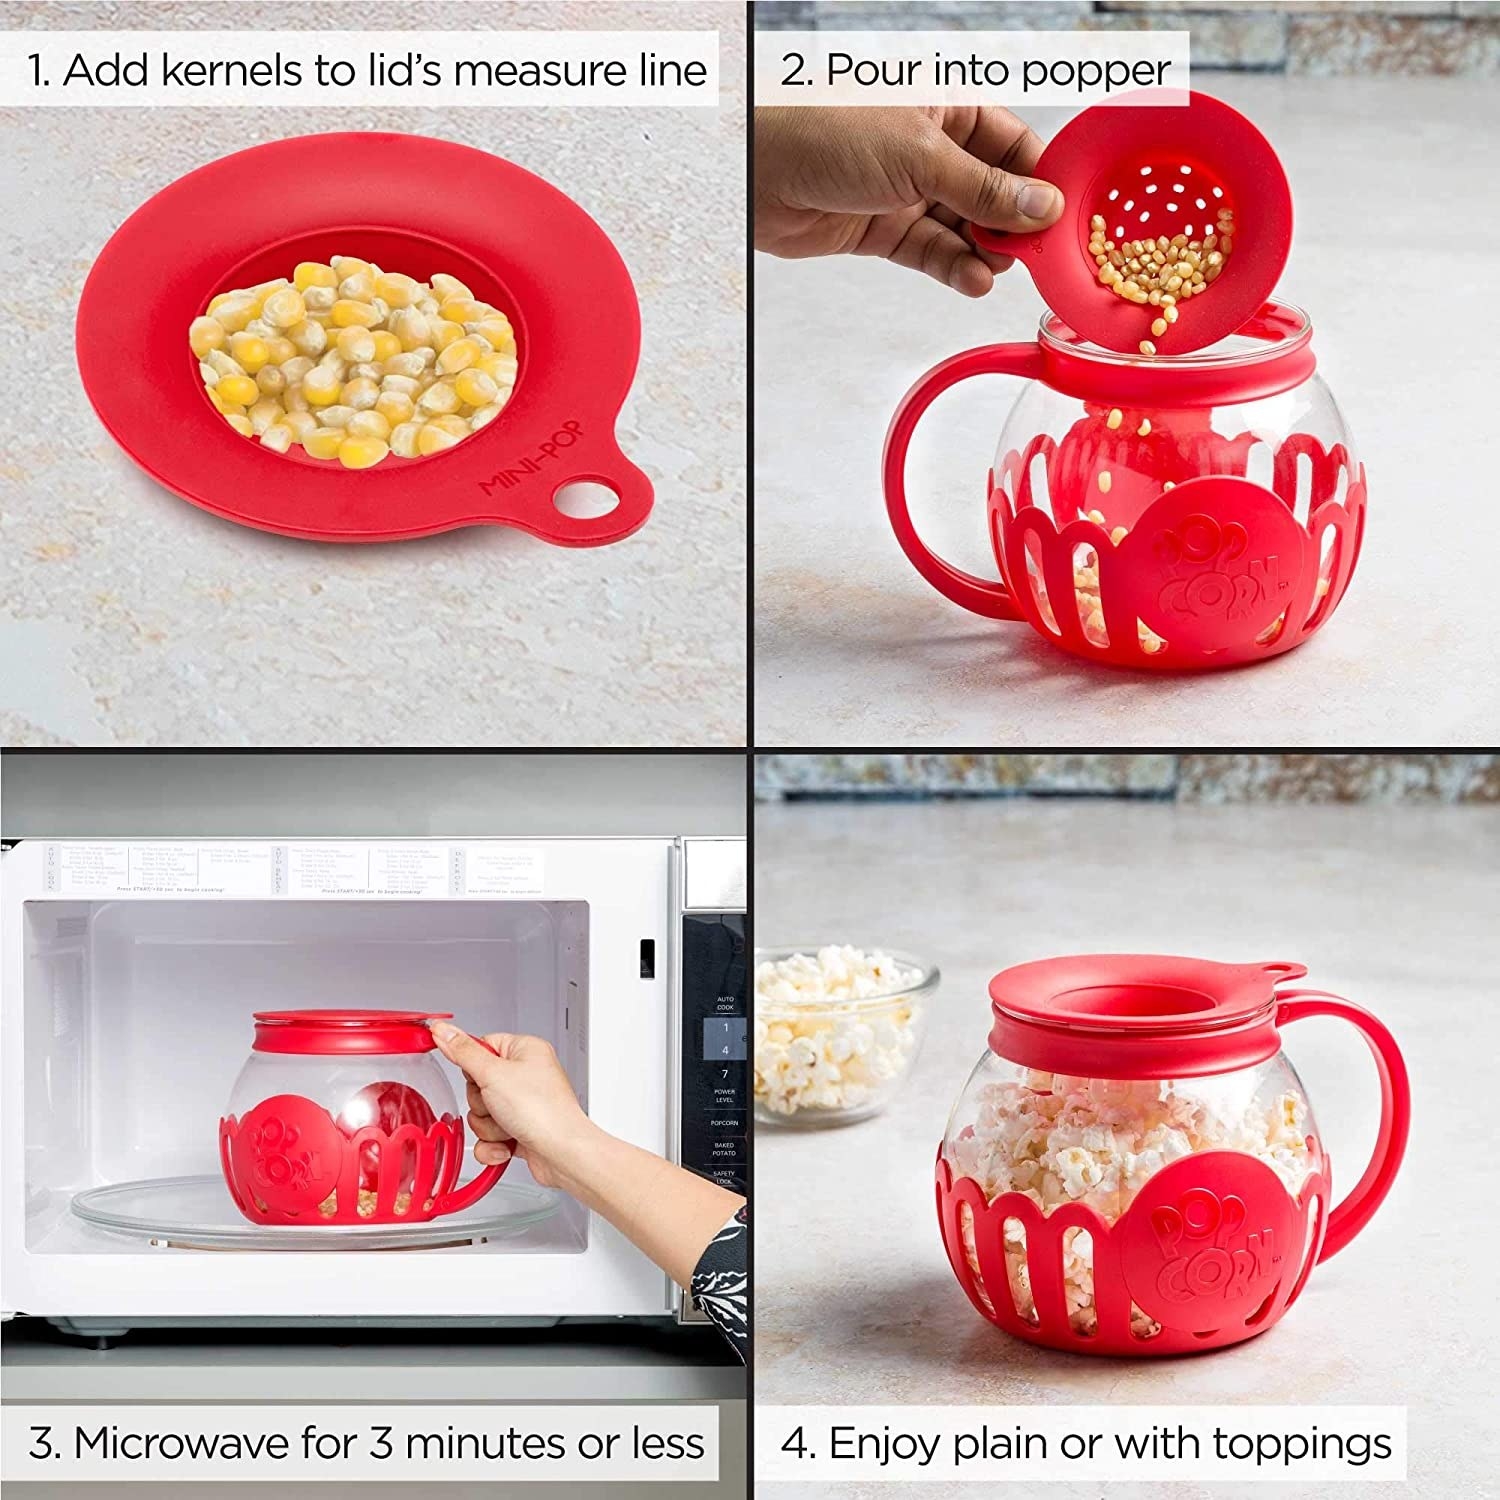 four steps of making popcorn, from adding kernels to pouring into popper to microwaving and enjoying